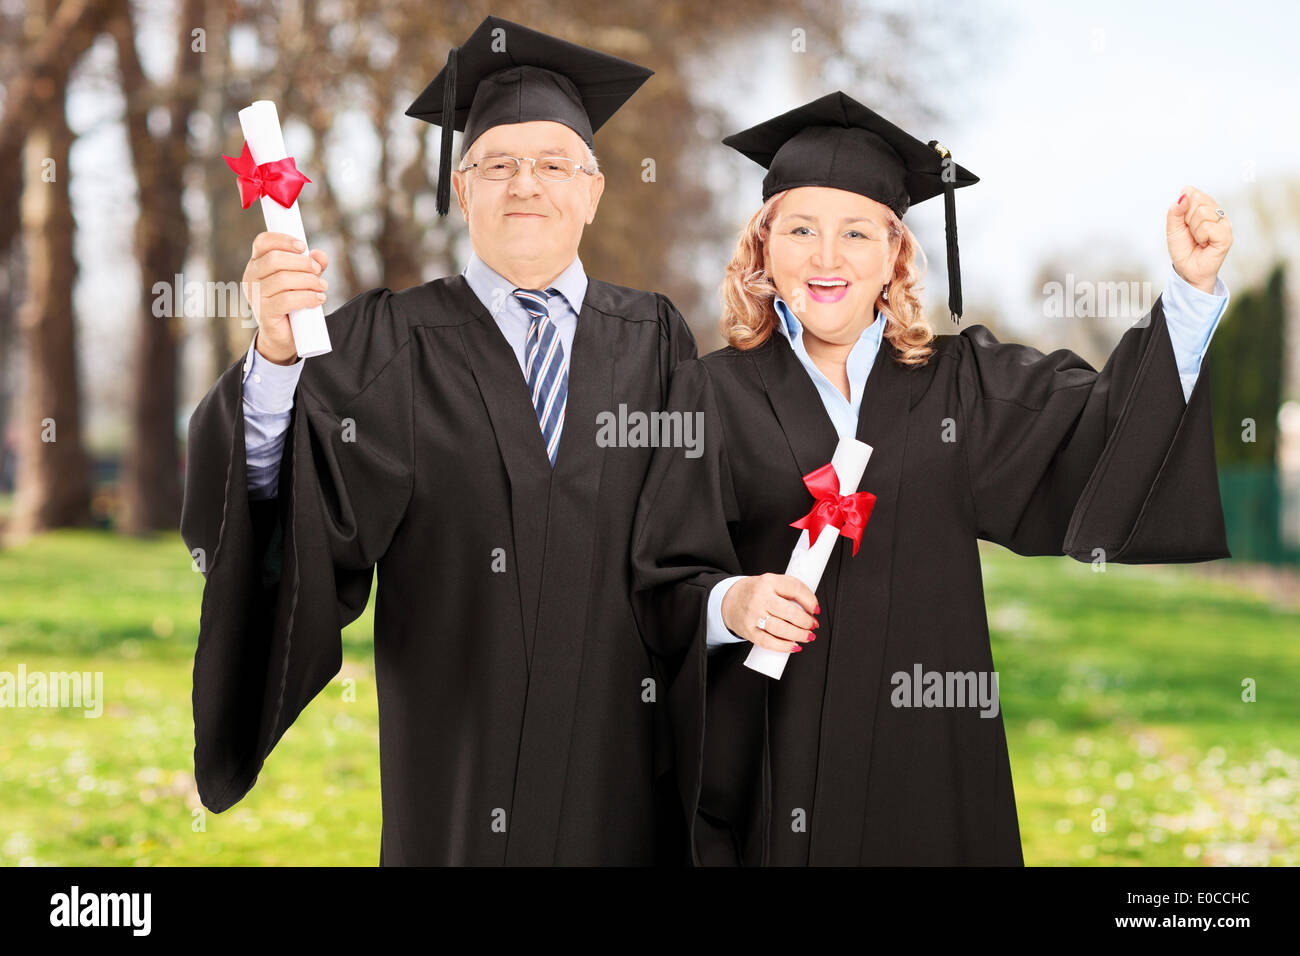 Mature couple celebrating their diplomas and their graduation in park Stock Photo